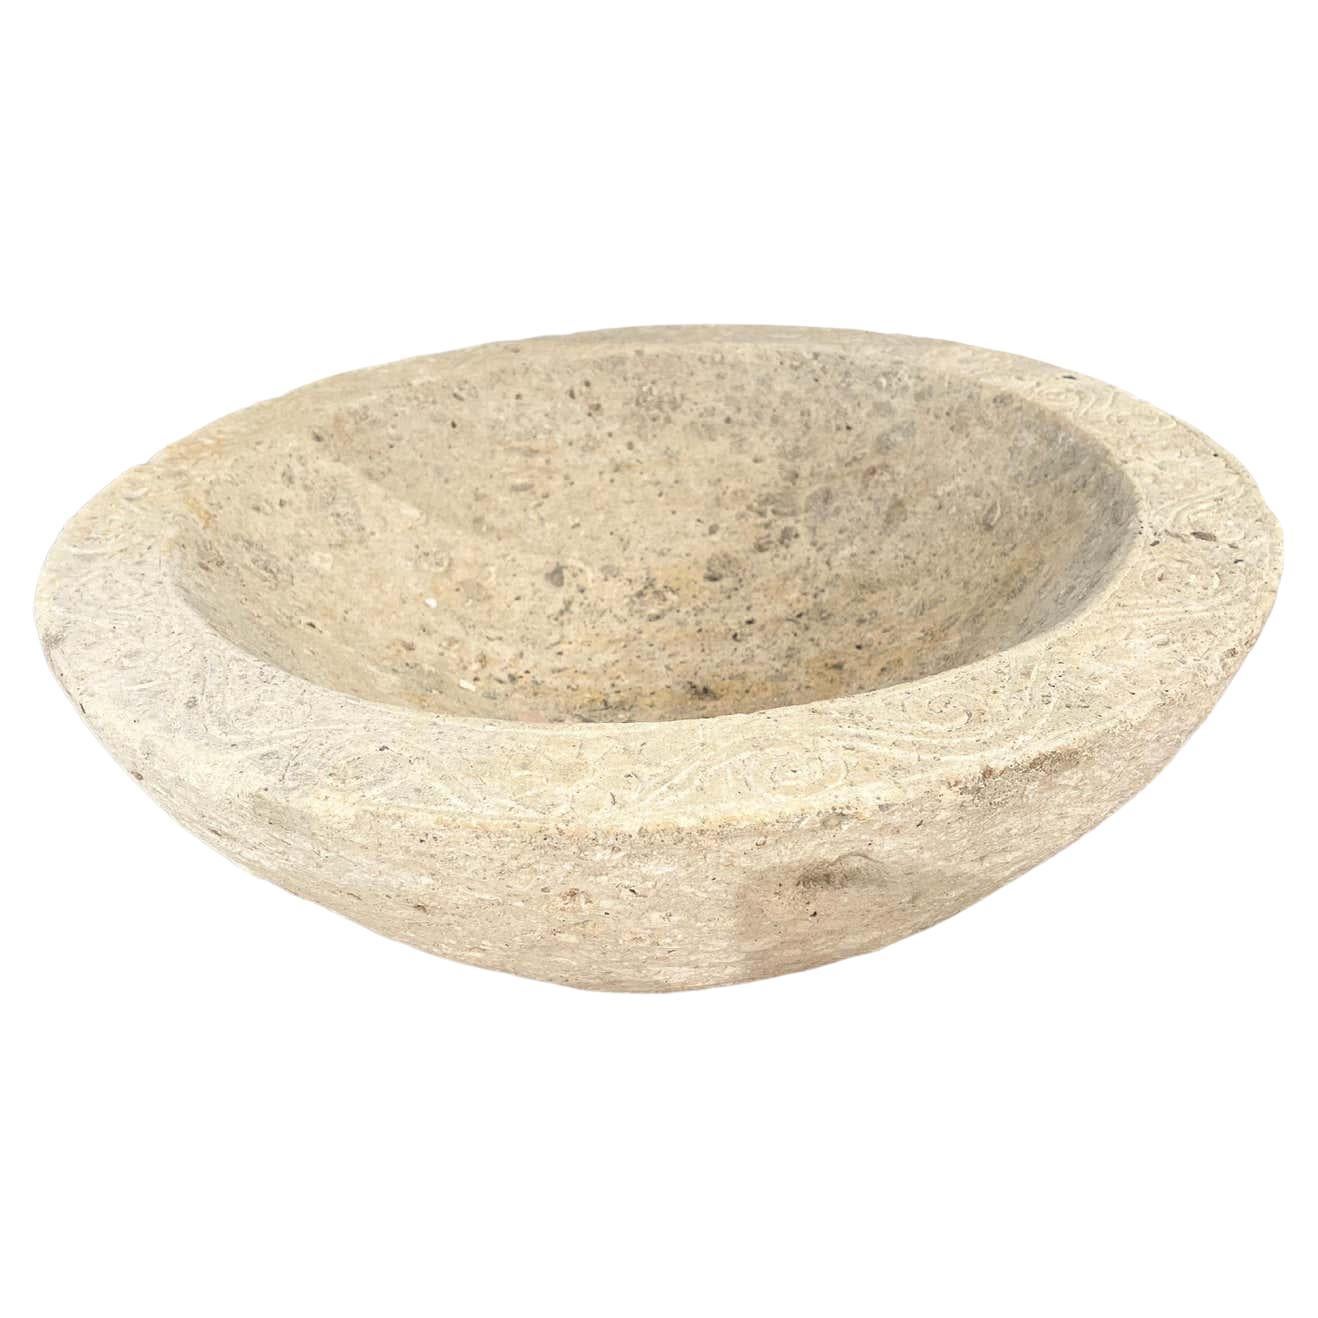 Sandstone Bowl with Carving For Sale